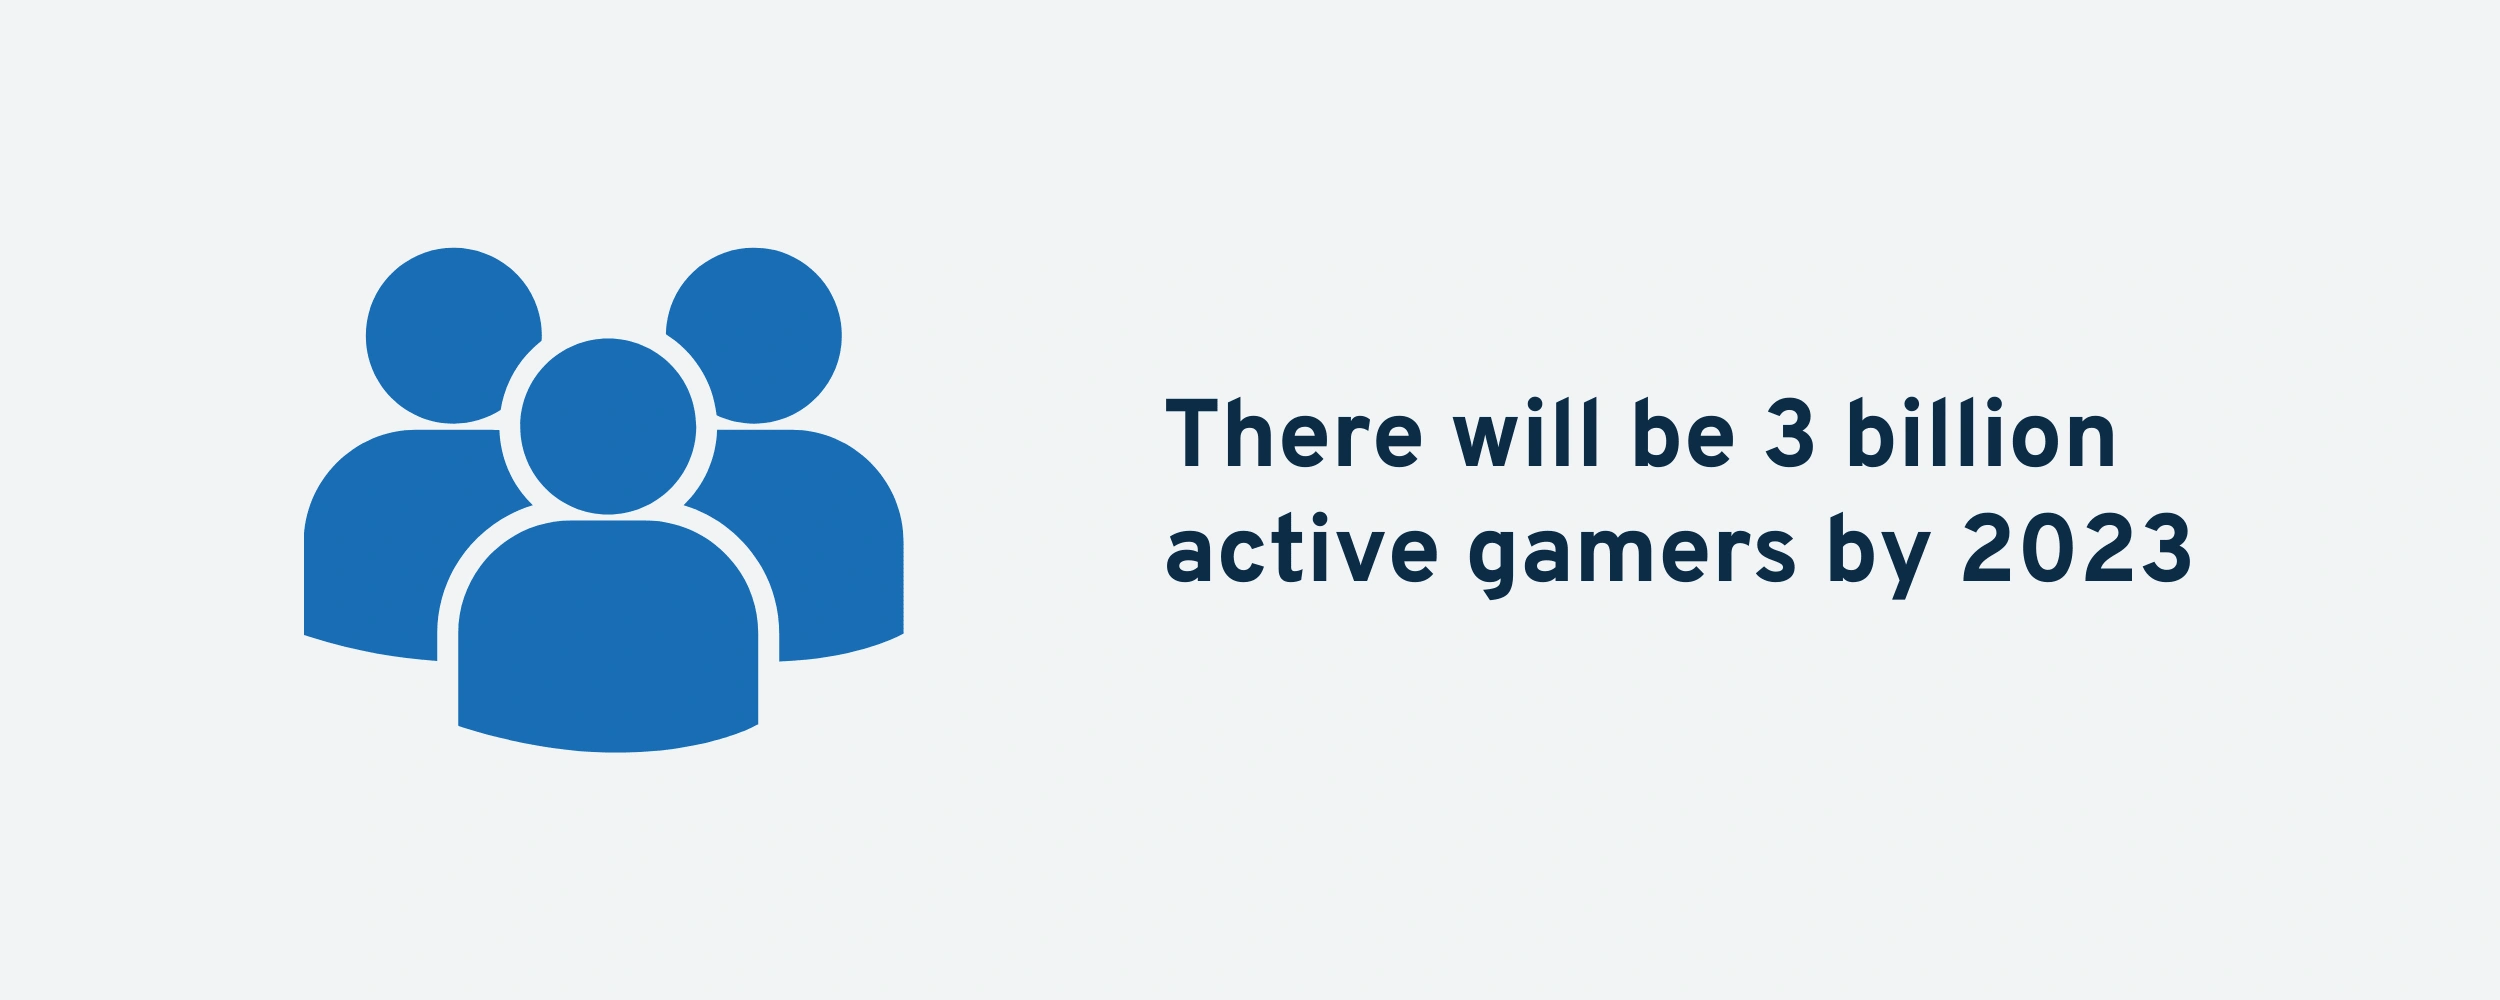 active-gamers-by-2023-min.png